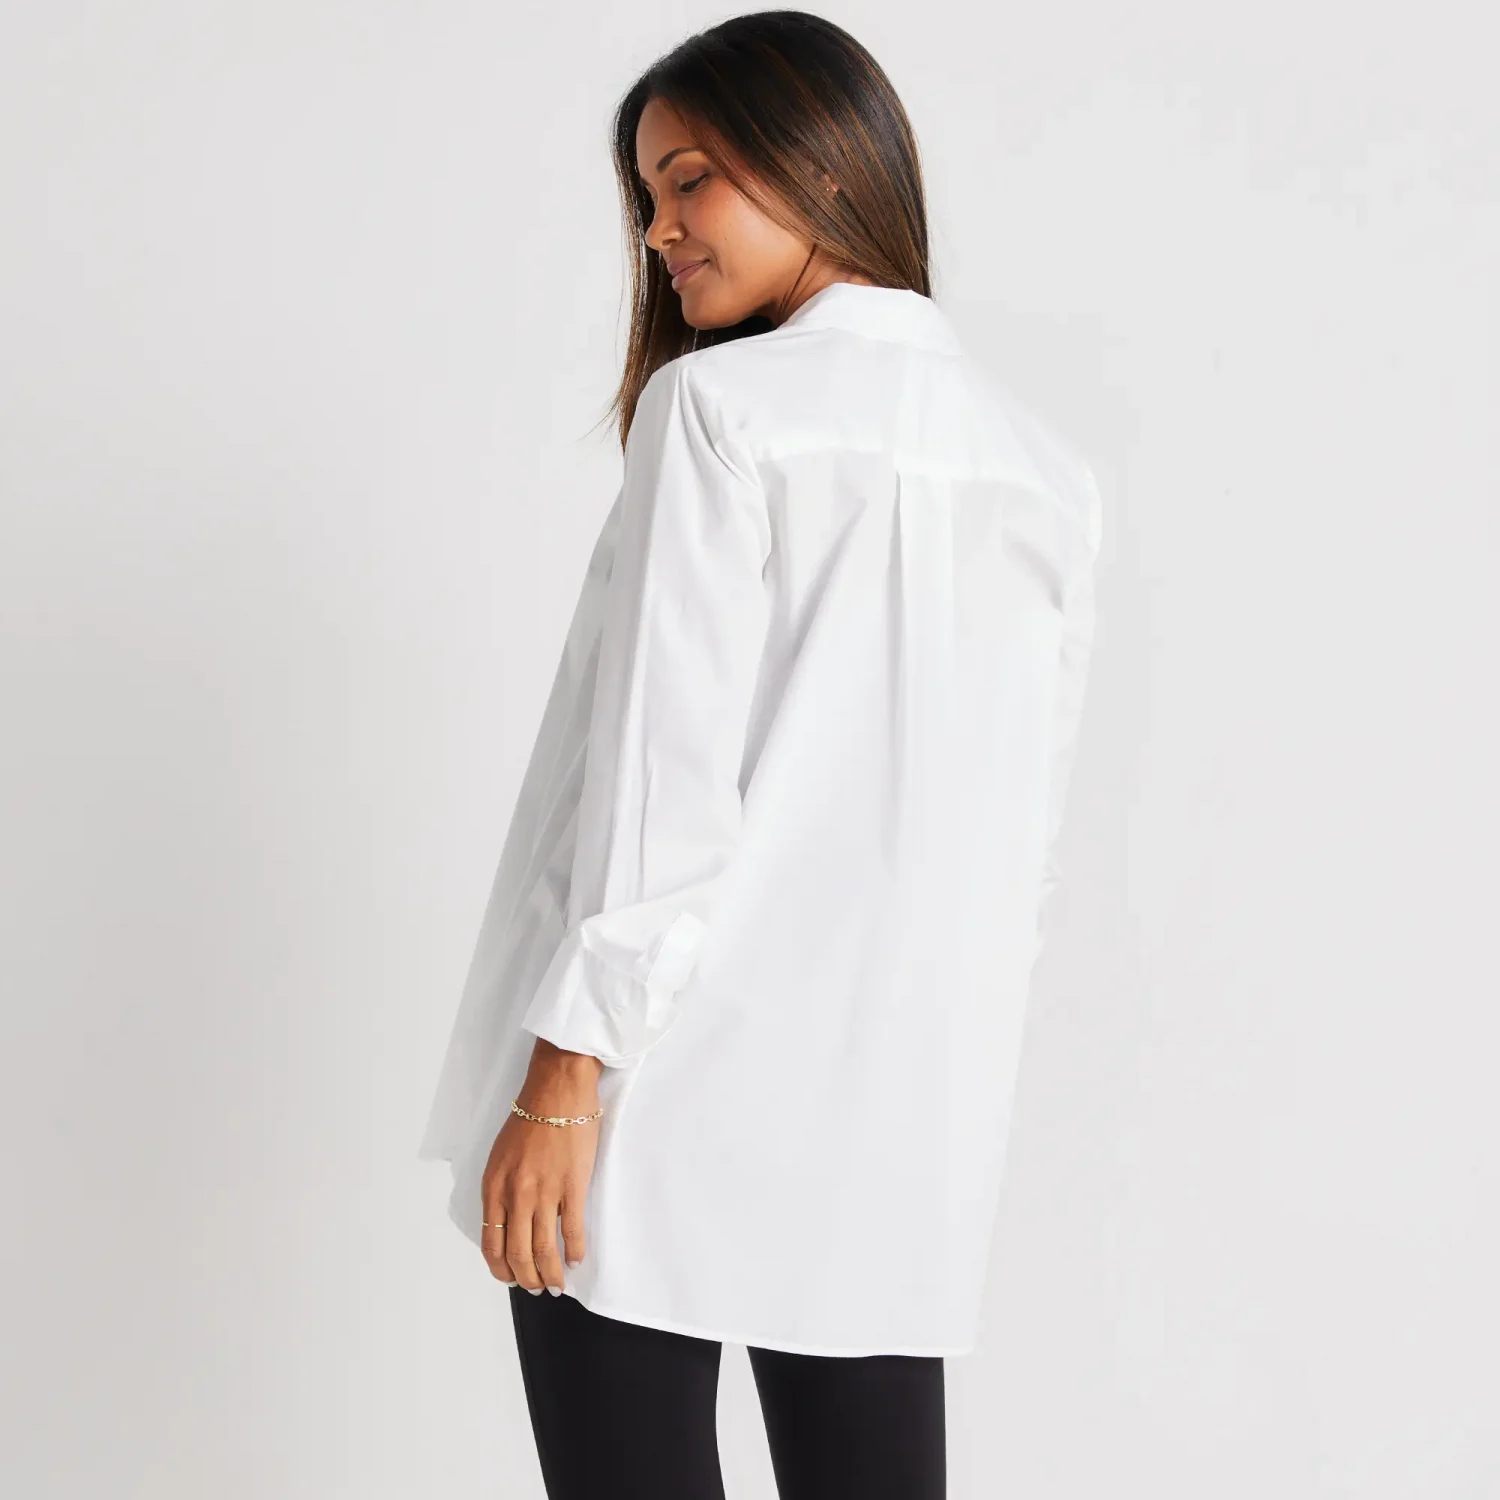 Hatch brand contemporary and stylish maternity friendly white button down shirts